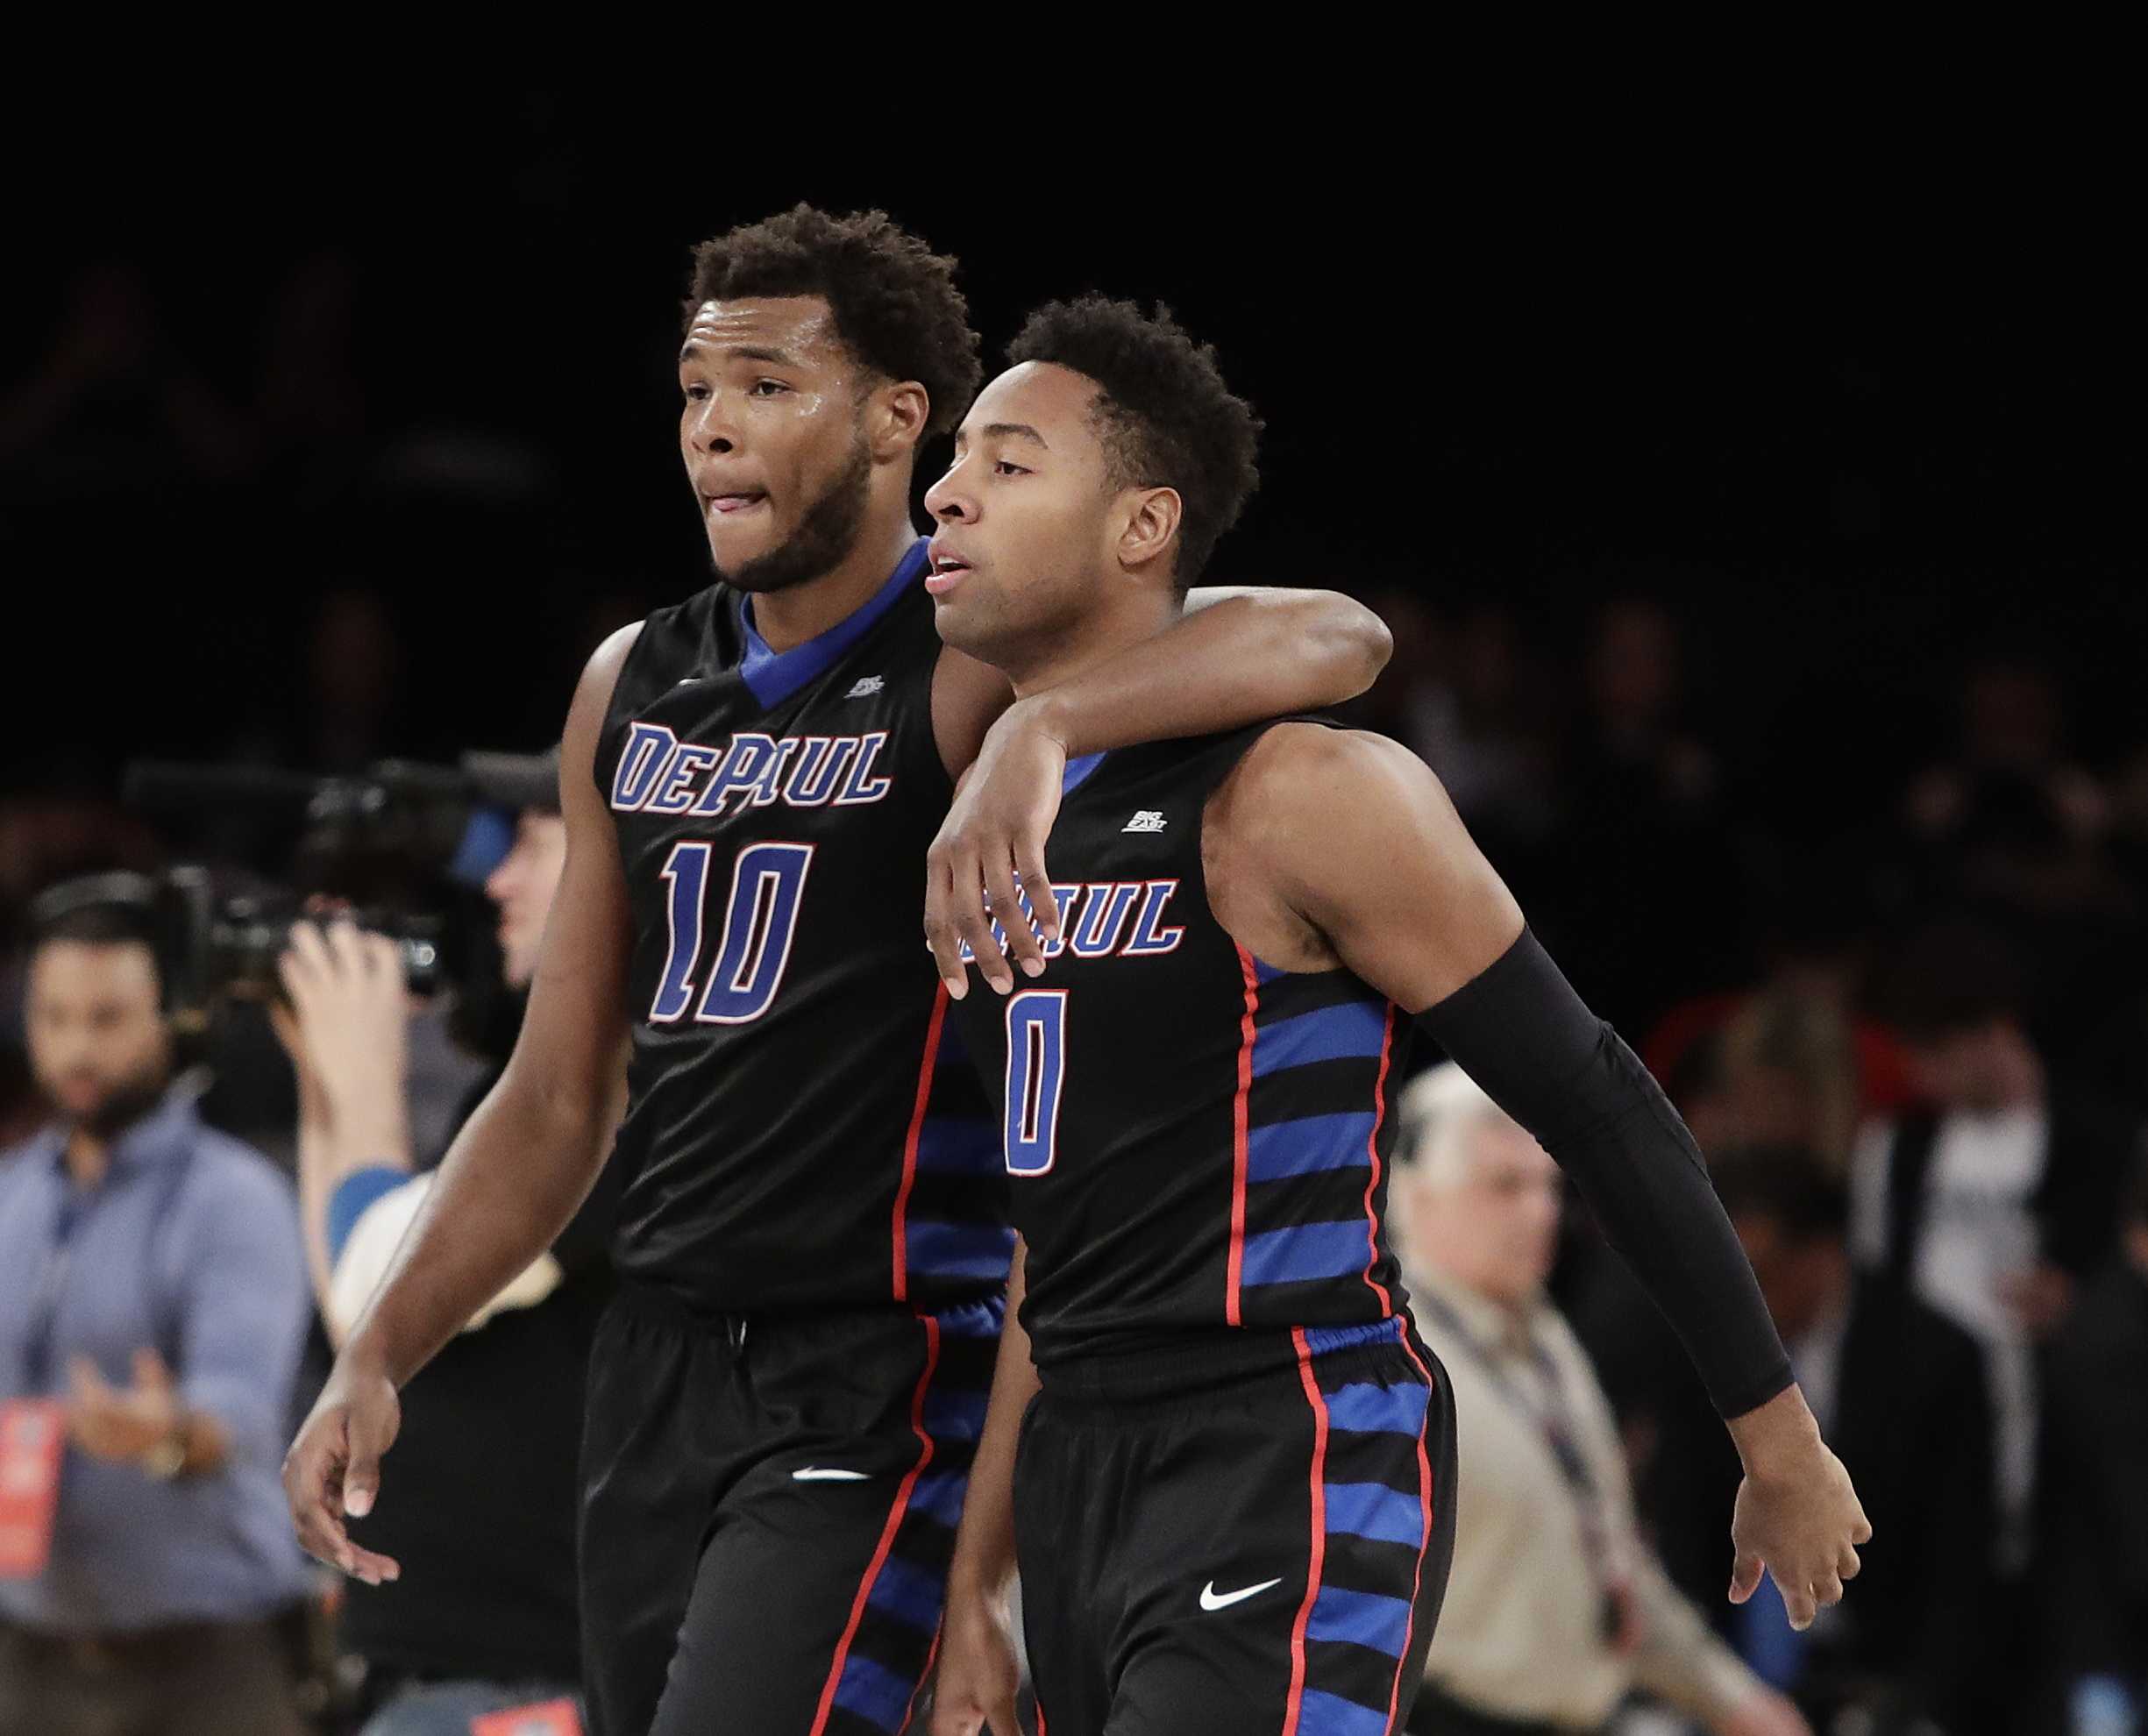 DePaul's Tre'Darius McCallum (10) and R.J. Curington (0) leave the court after the team's NCAA college basketball game against Xavier during the Big East men's tournament Wednesday, March 8, 2017, in New York. Xavier won 75-64. (AP Photo/Frank Franklin II)